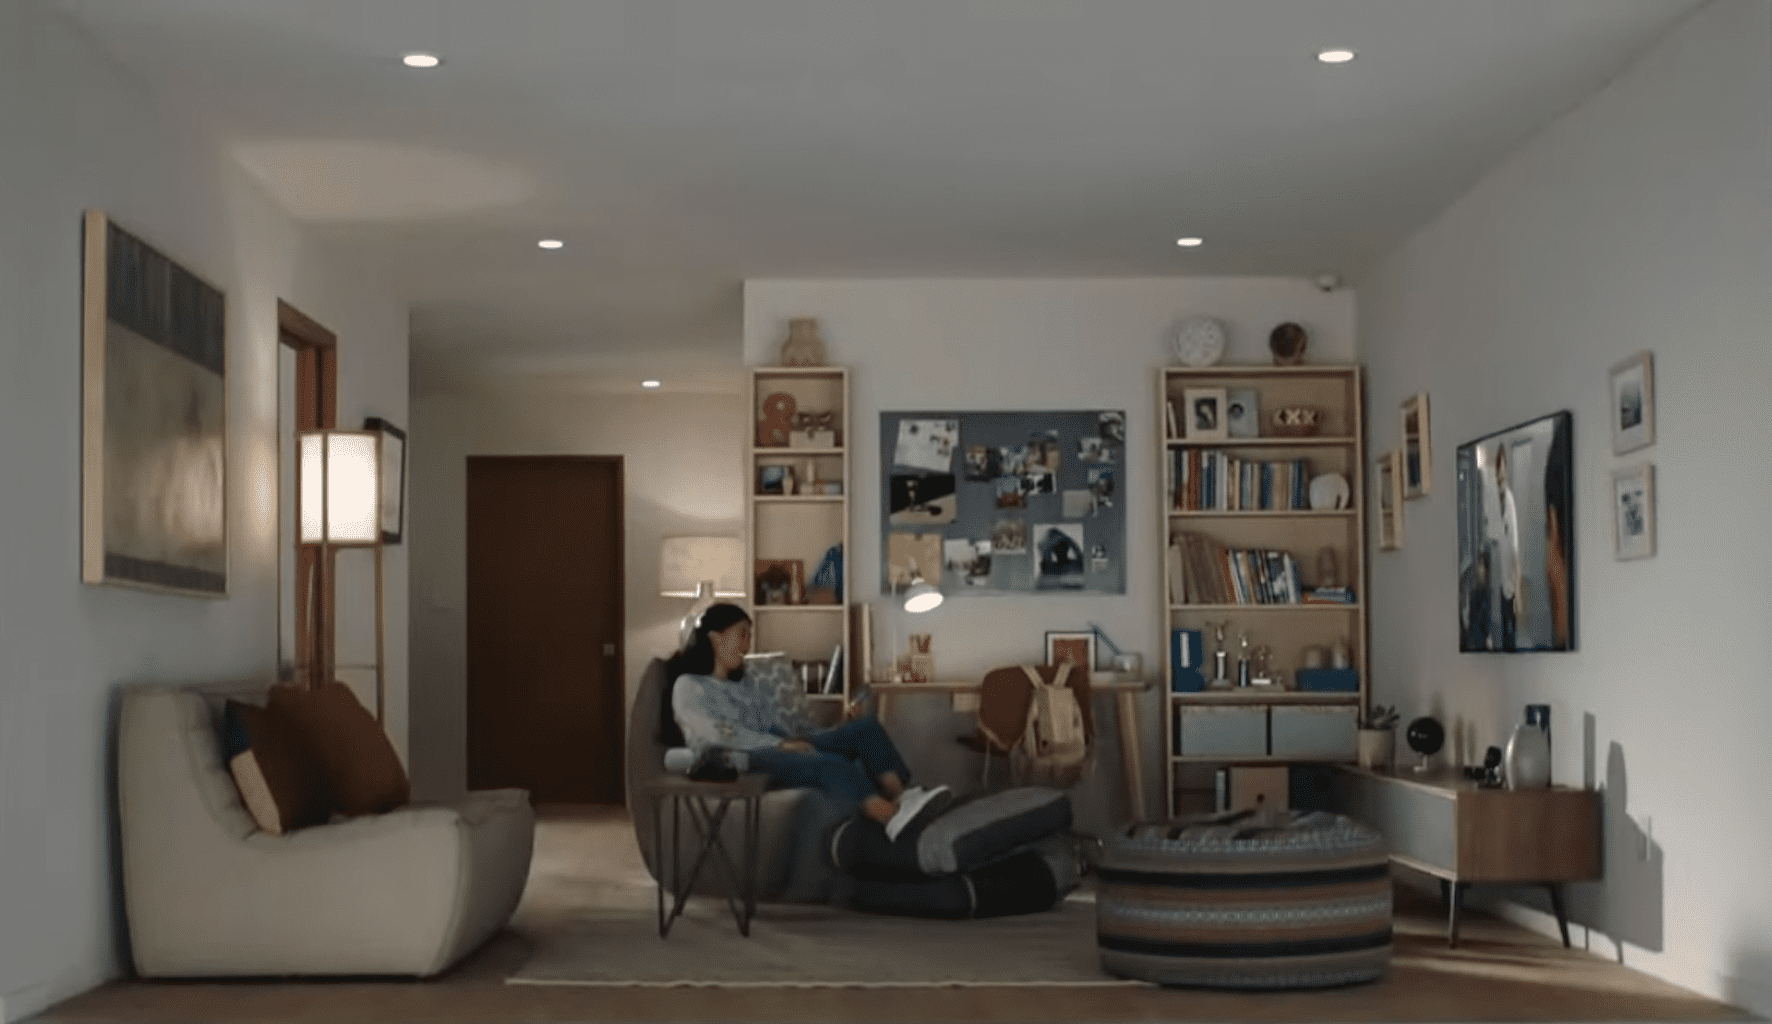 Smart Switches or Smart bulbs – which is better